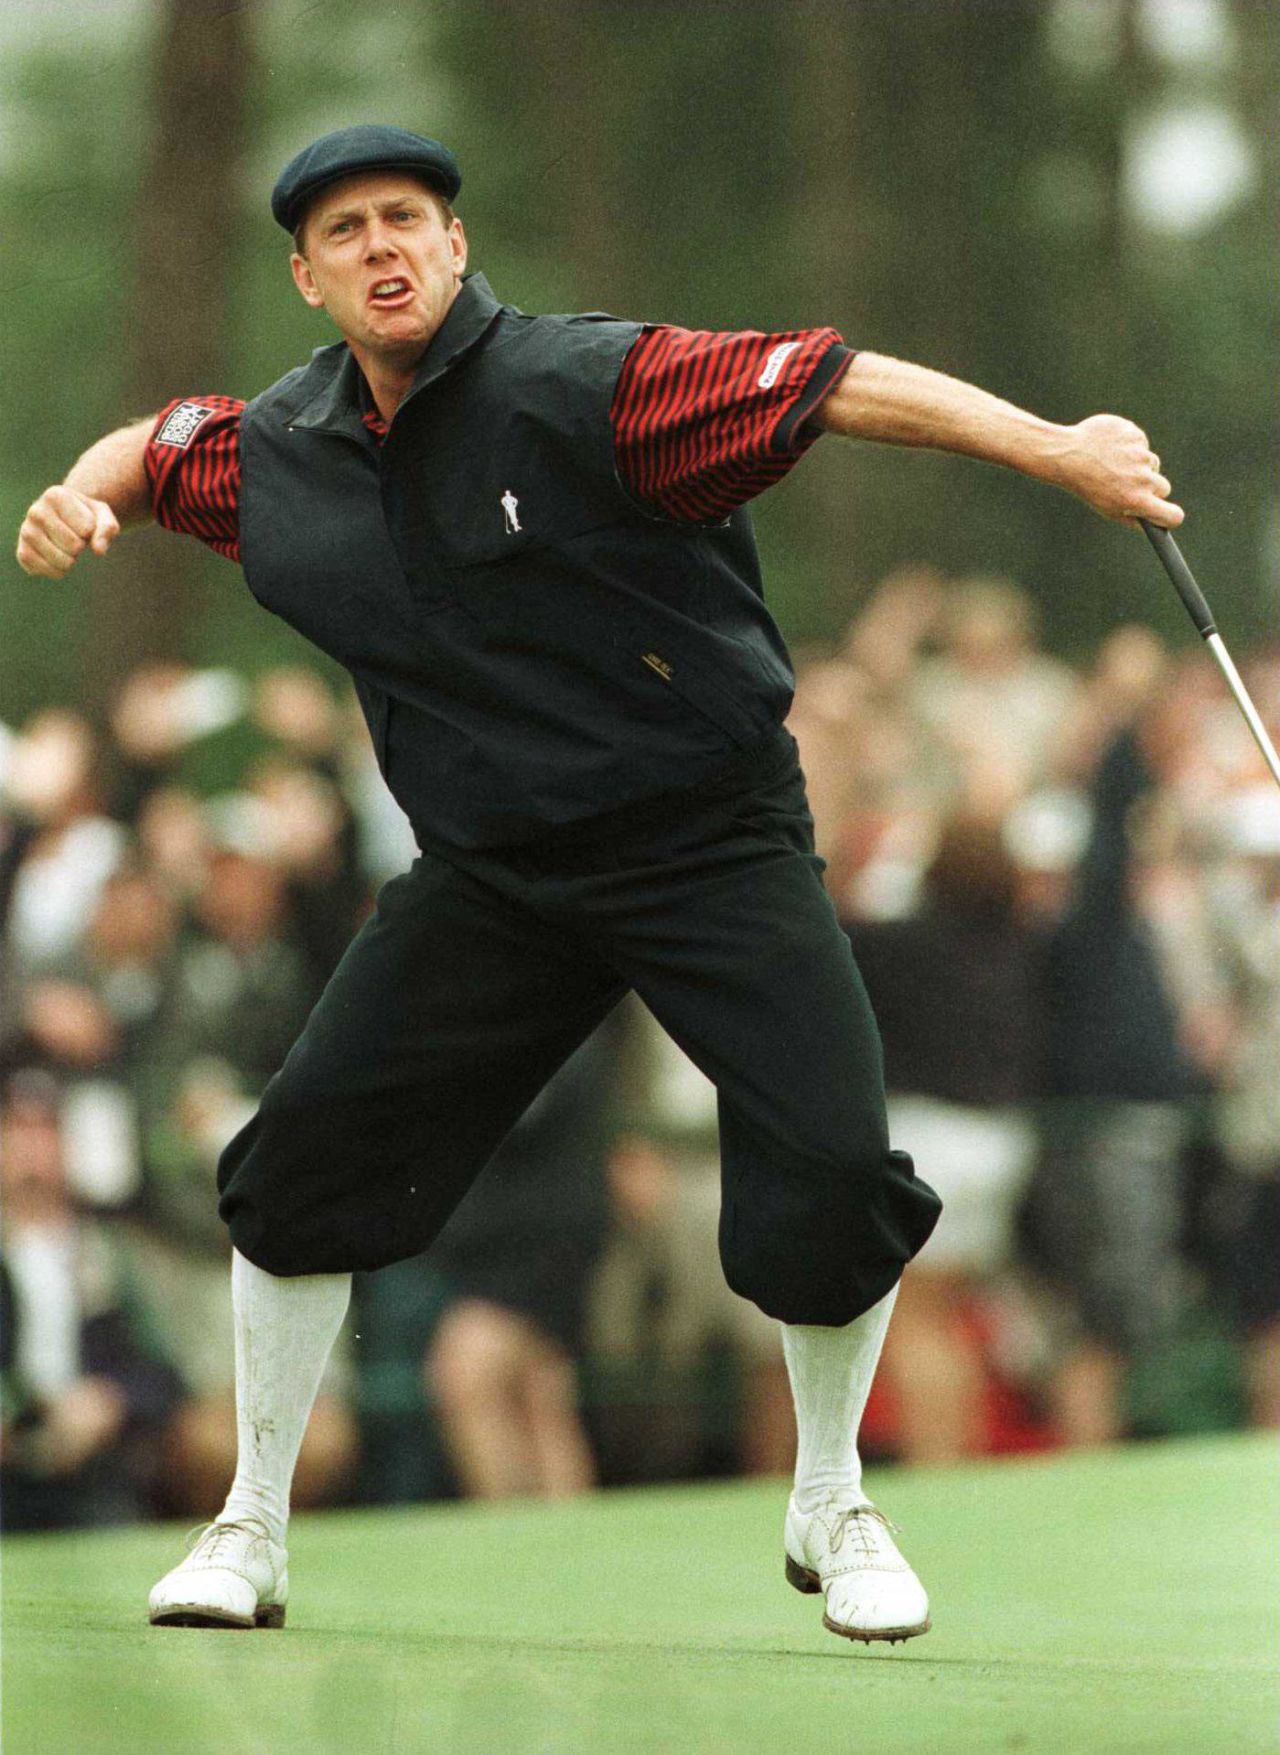 An emotional Payne Stewart celebrates sinking the winning putt at a rainy Pinehurst in 1999 to claim the U.S. Open, his third and final major title.<br /><br />Stewart would tragically lose his life in a plane crash just months later.<br /><br />"To have taken this image is very poignant and the phrase 'every picture tells a story' is so true as it brings back great memories of one of the truly, brilliantly nice people in golf," reflected Cannon.